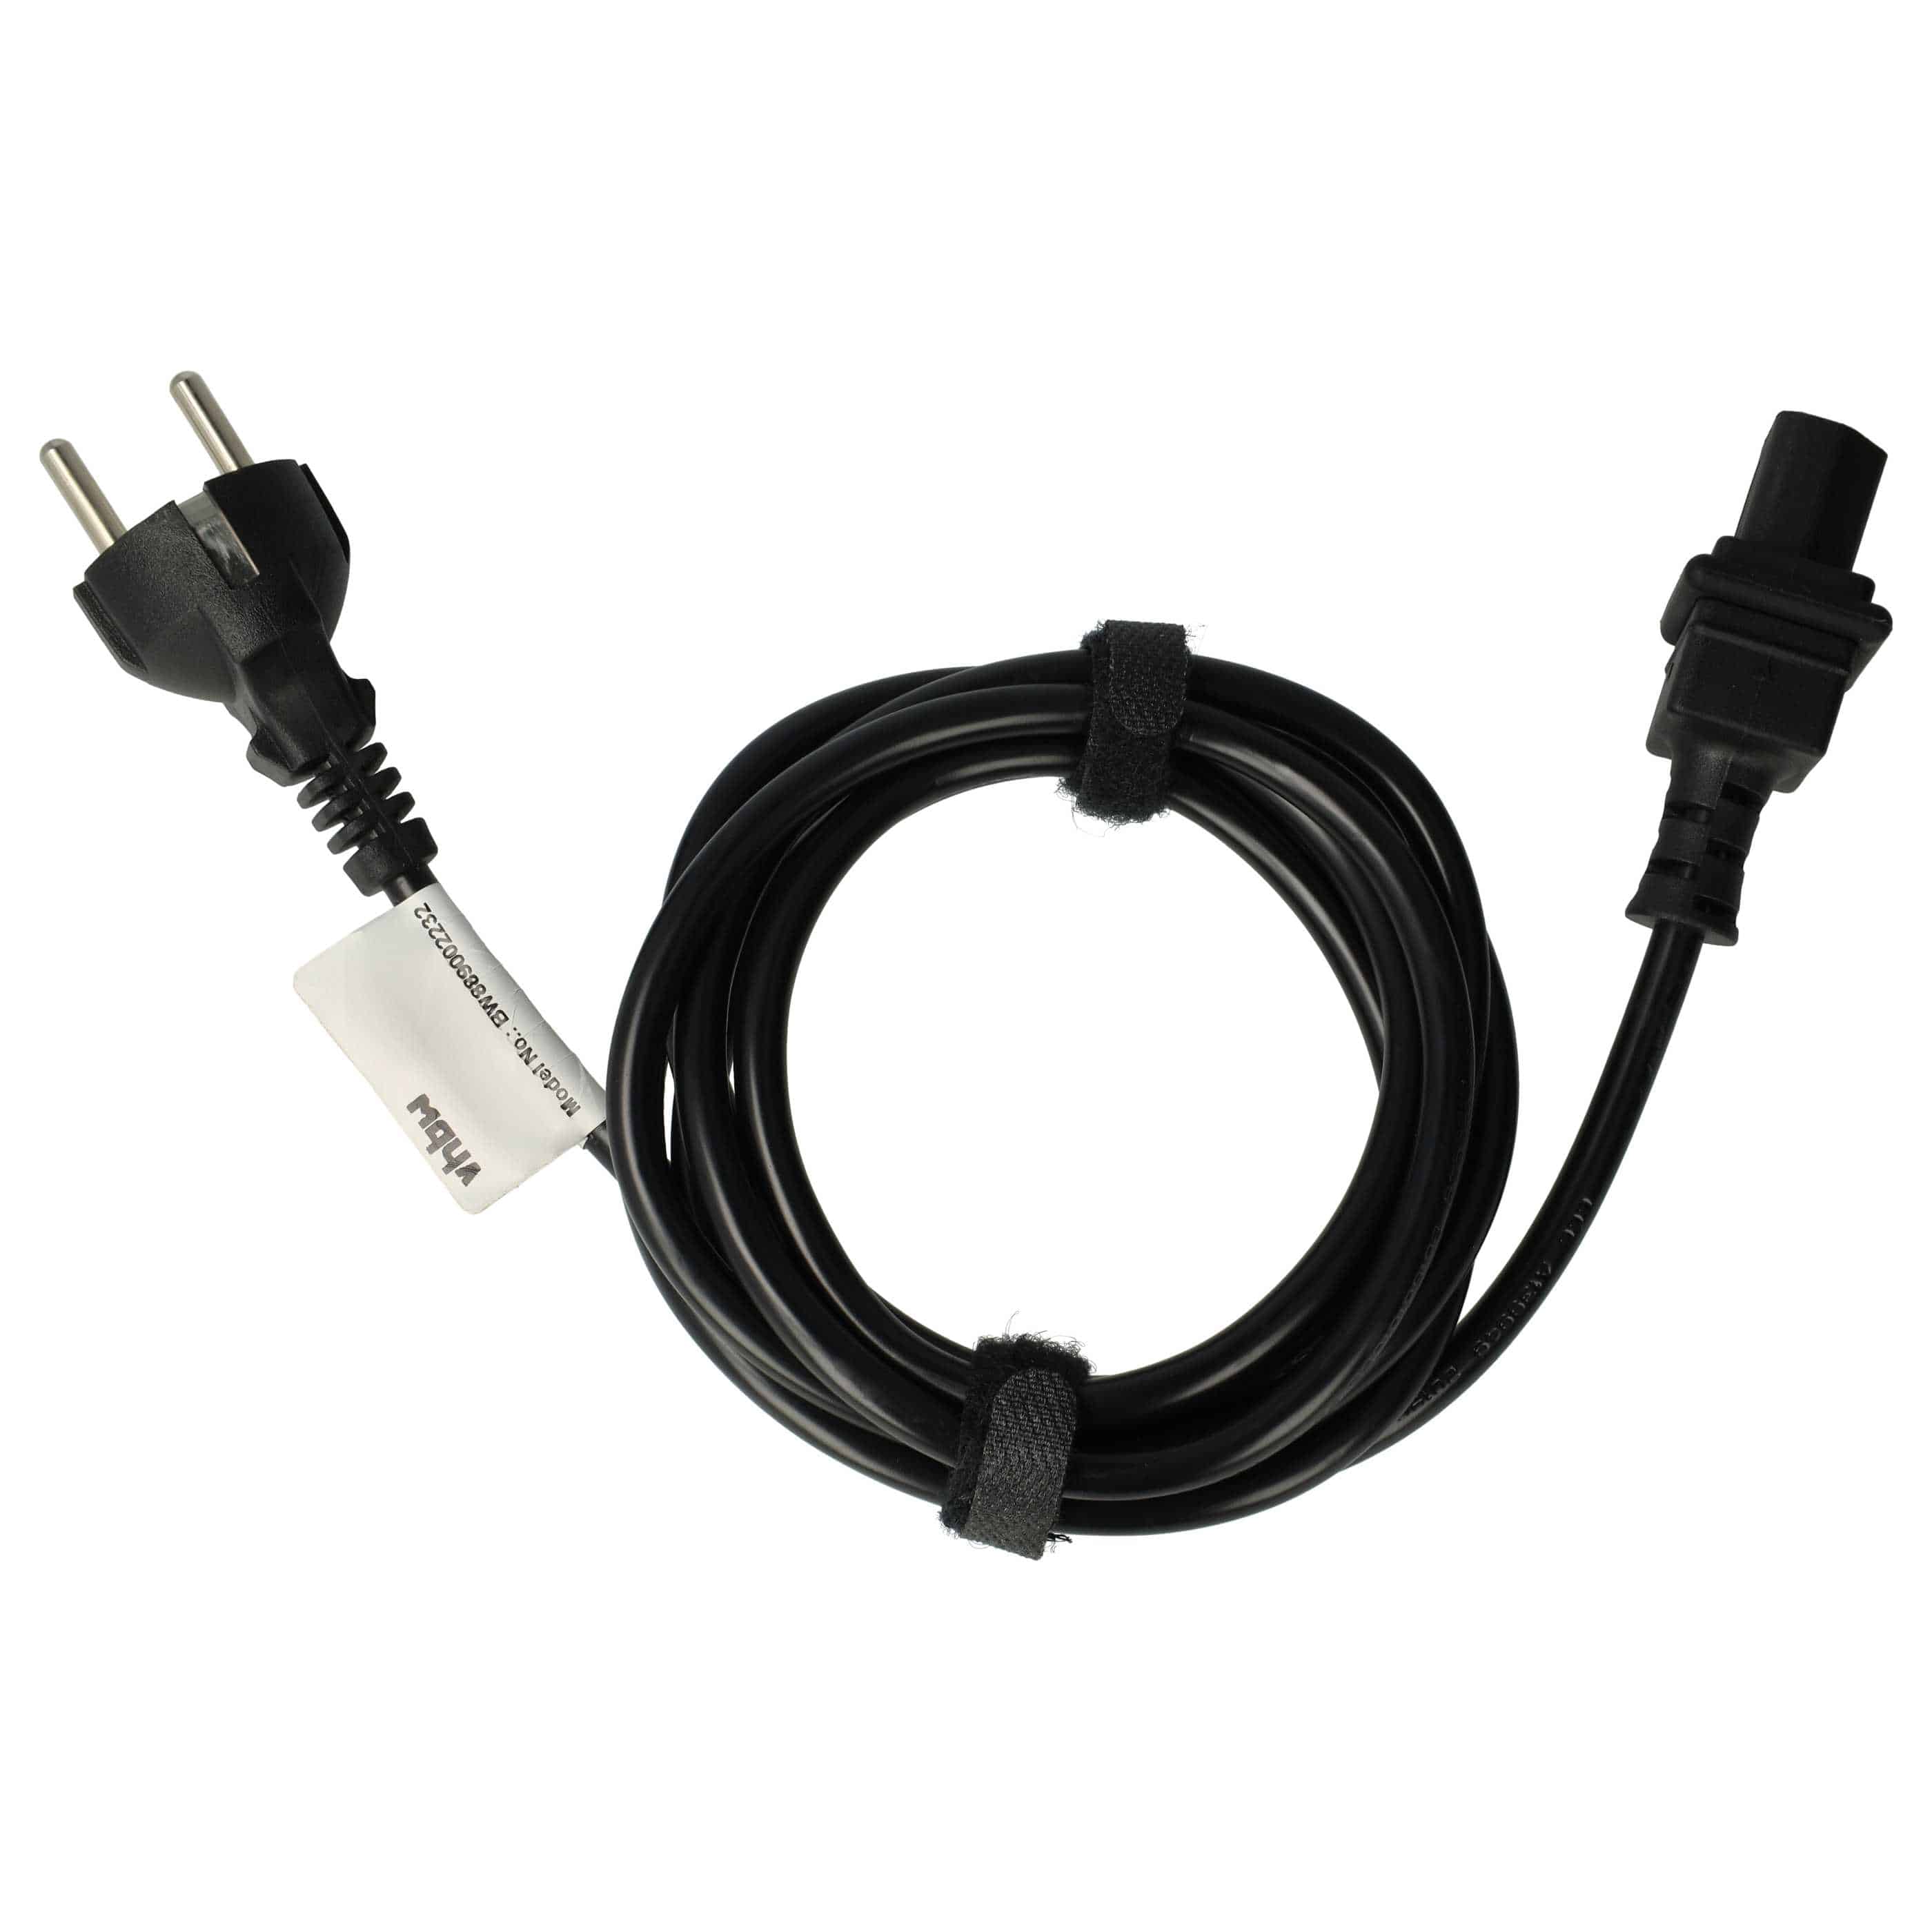 Transformer Cable replaces Maytronics 5898411LF for Maytronics Pool Robot - 2.2 m Power Cable 